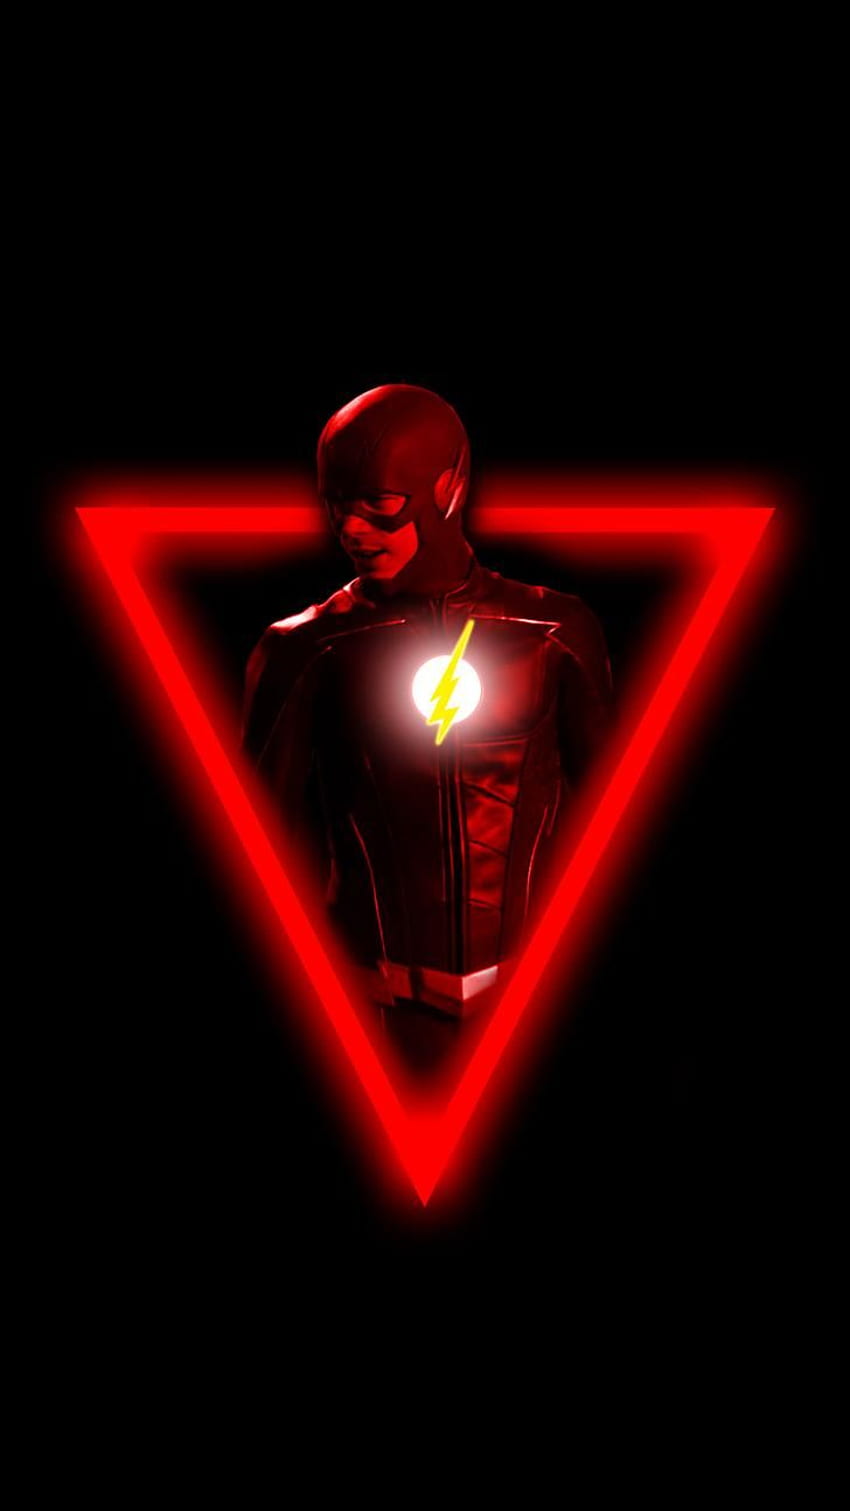 11 Best The Flash wallpapers for iPhone (Free 4K download) - iGeeksBlog